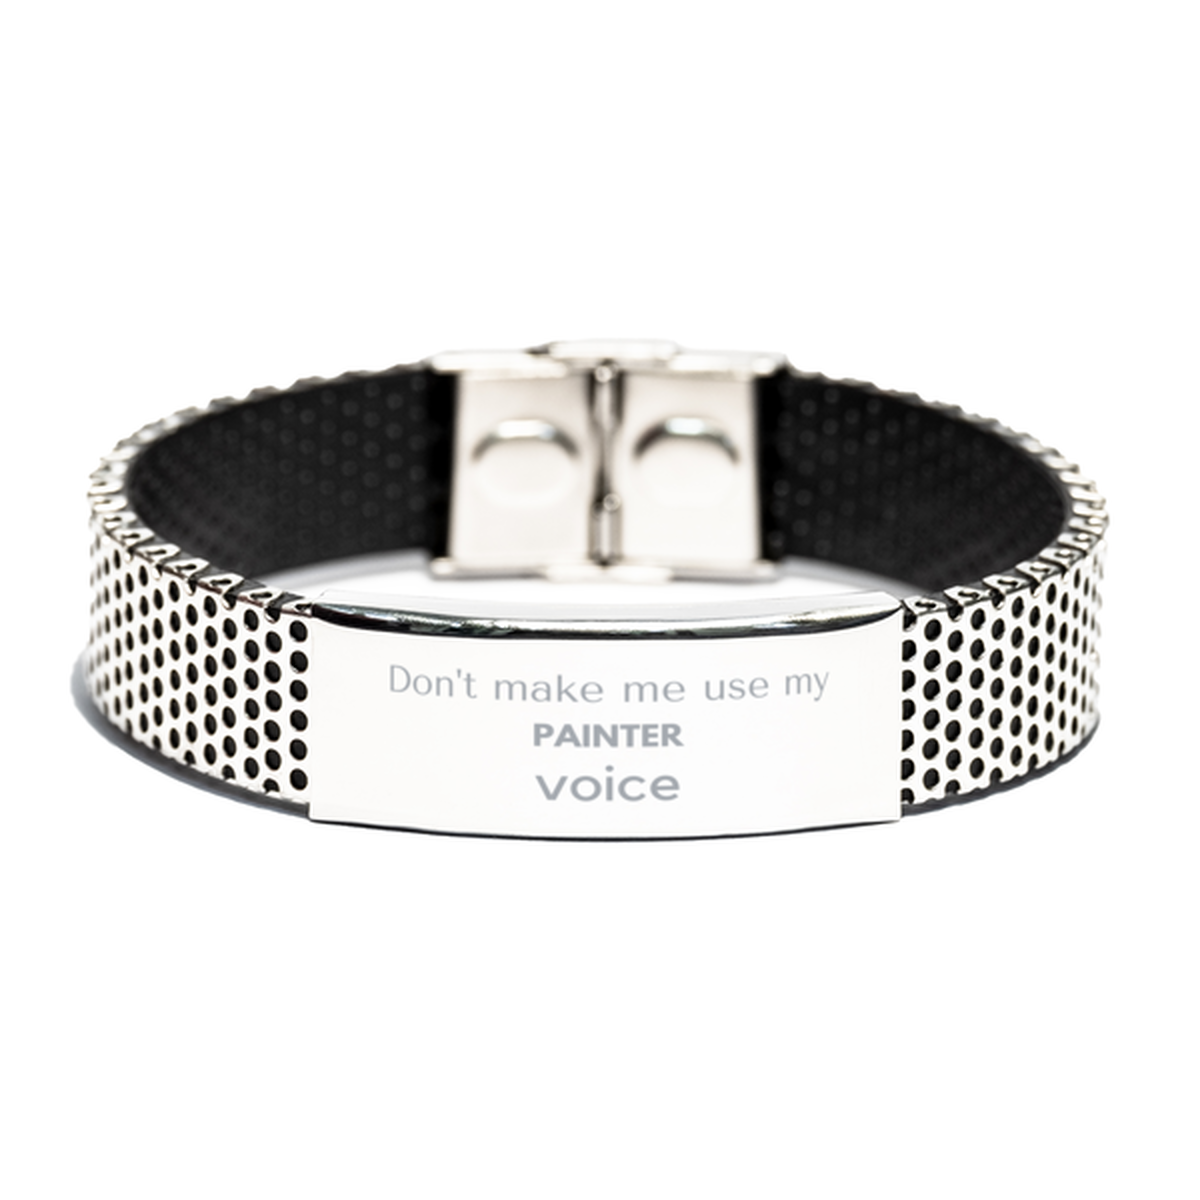 Don't make me use my Painter voice, Sarcasm Painter Gifts, Christmas Painter Stainless Steel Bracelet Birthday Unique Gifts For Painter Coworkers, Men, Women, Colleague, Friends